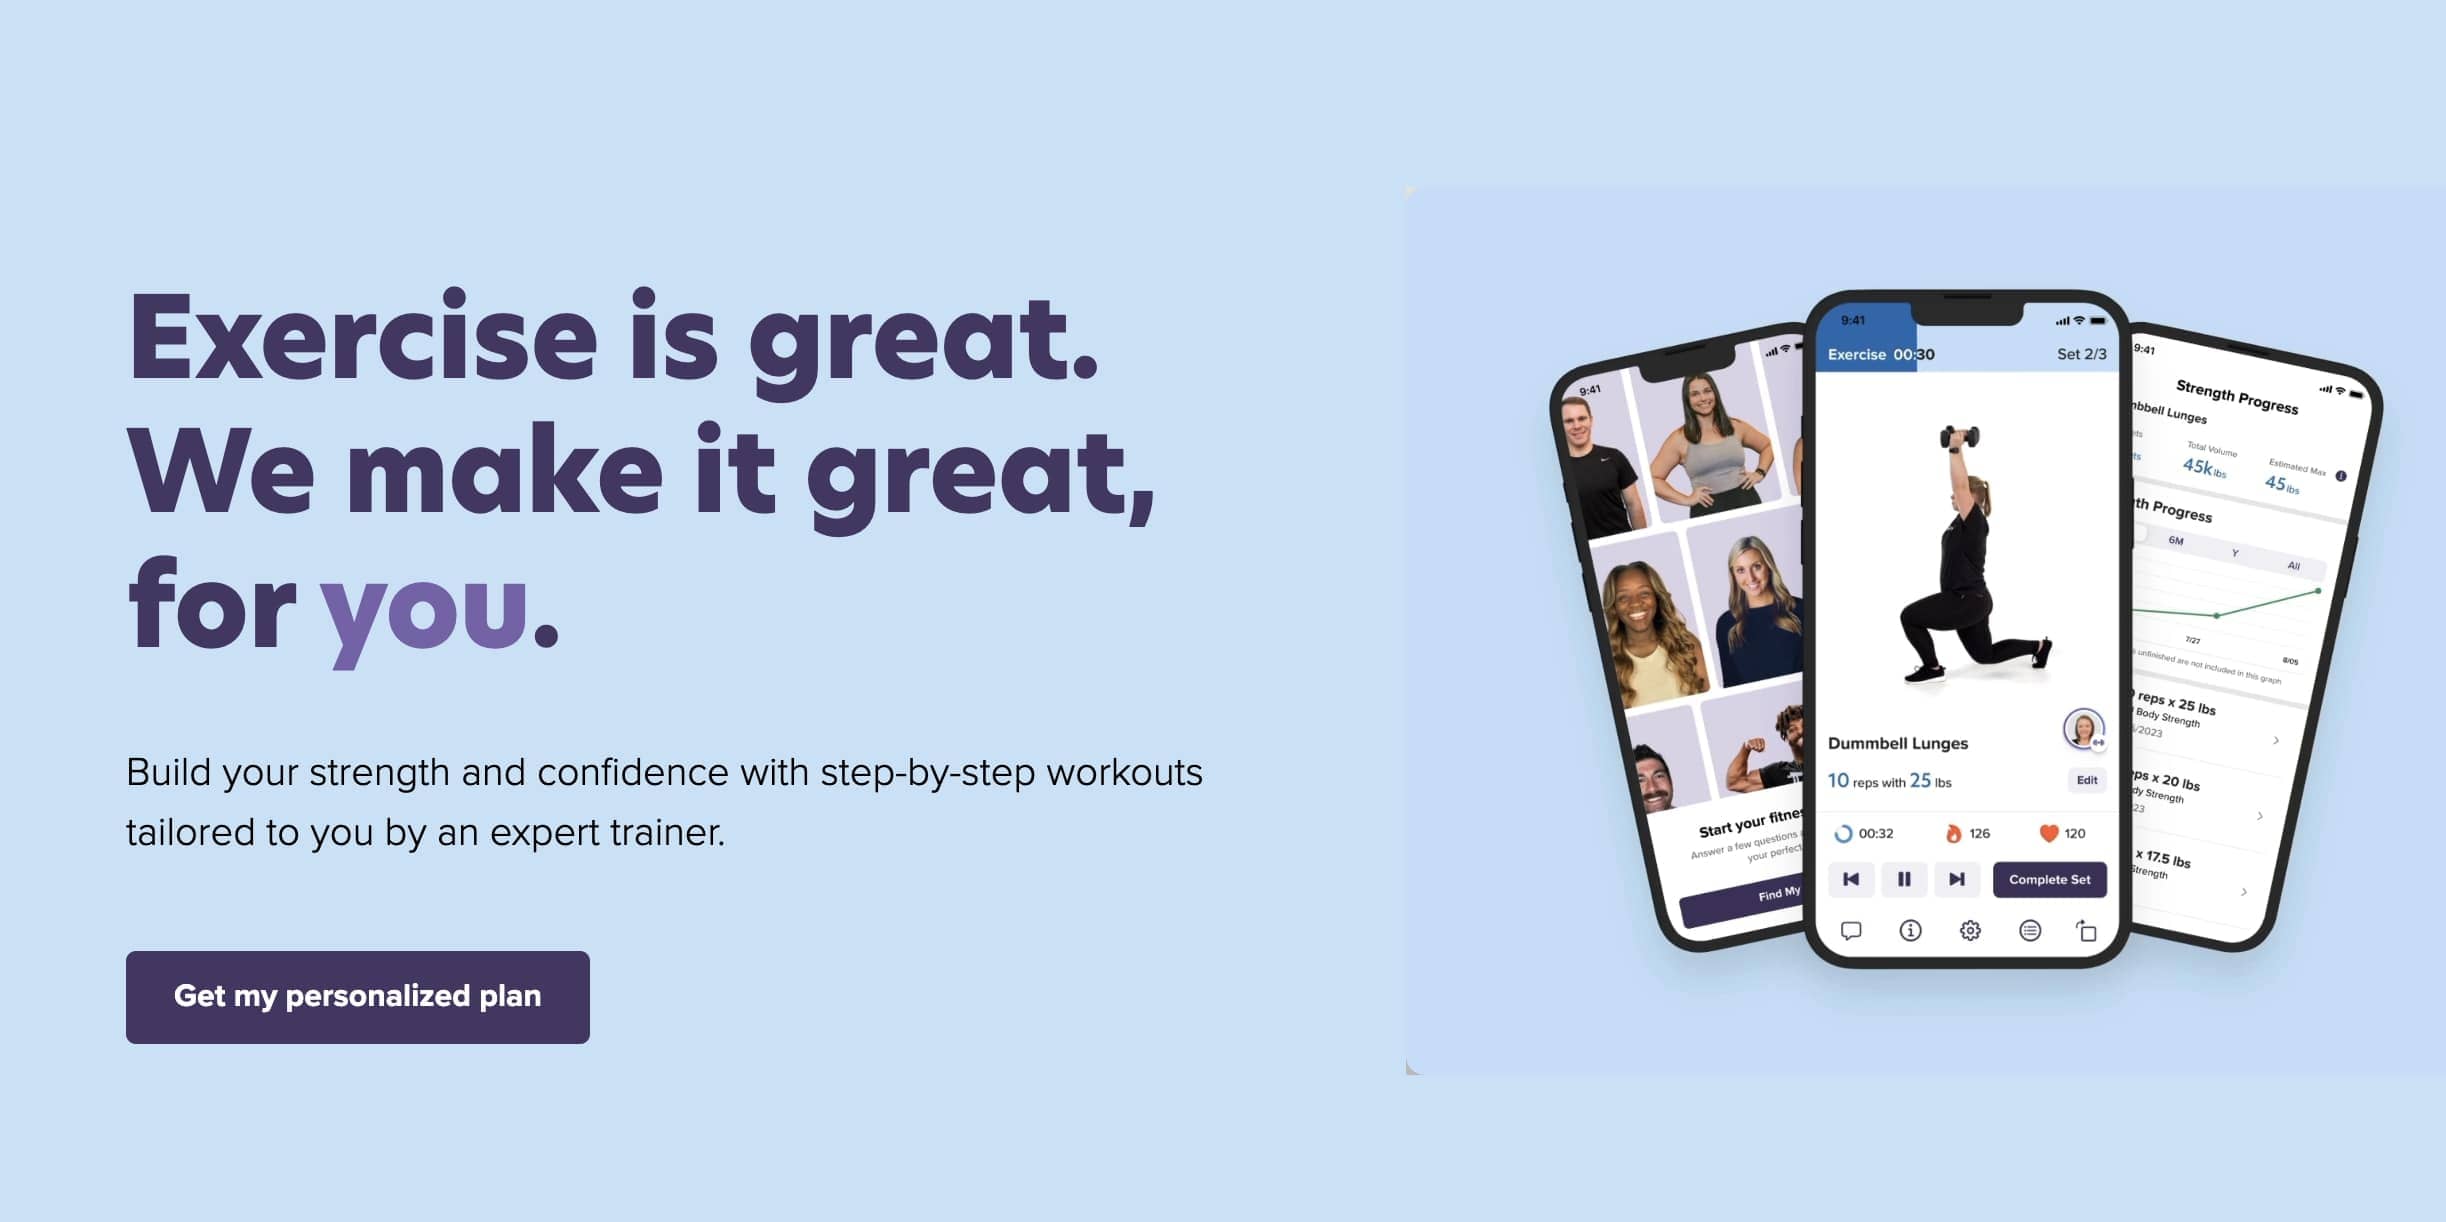 Promotional image for a fitness app in 2024 showing the slogan, "Exercise is great. We make it great, for you." beside three smartphones displaying innovative workout routines and fitness plans from leading Fitness Tech companies.